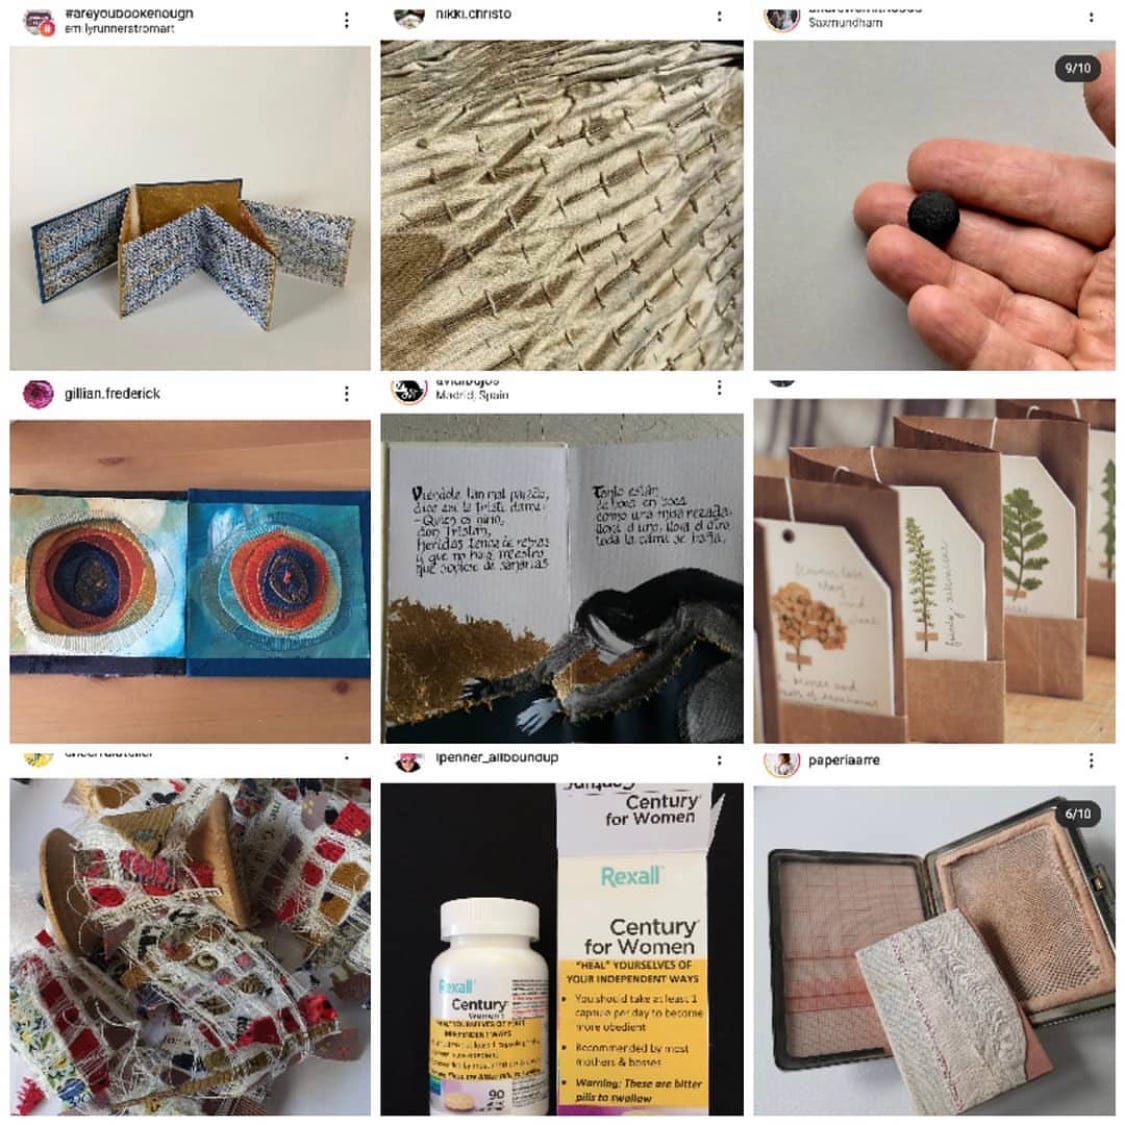 screen grab of a group of nine photos of submissions to are you book enough heal with books made from paper and fabric and even a ball of ash